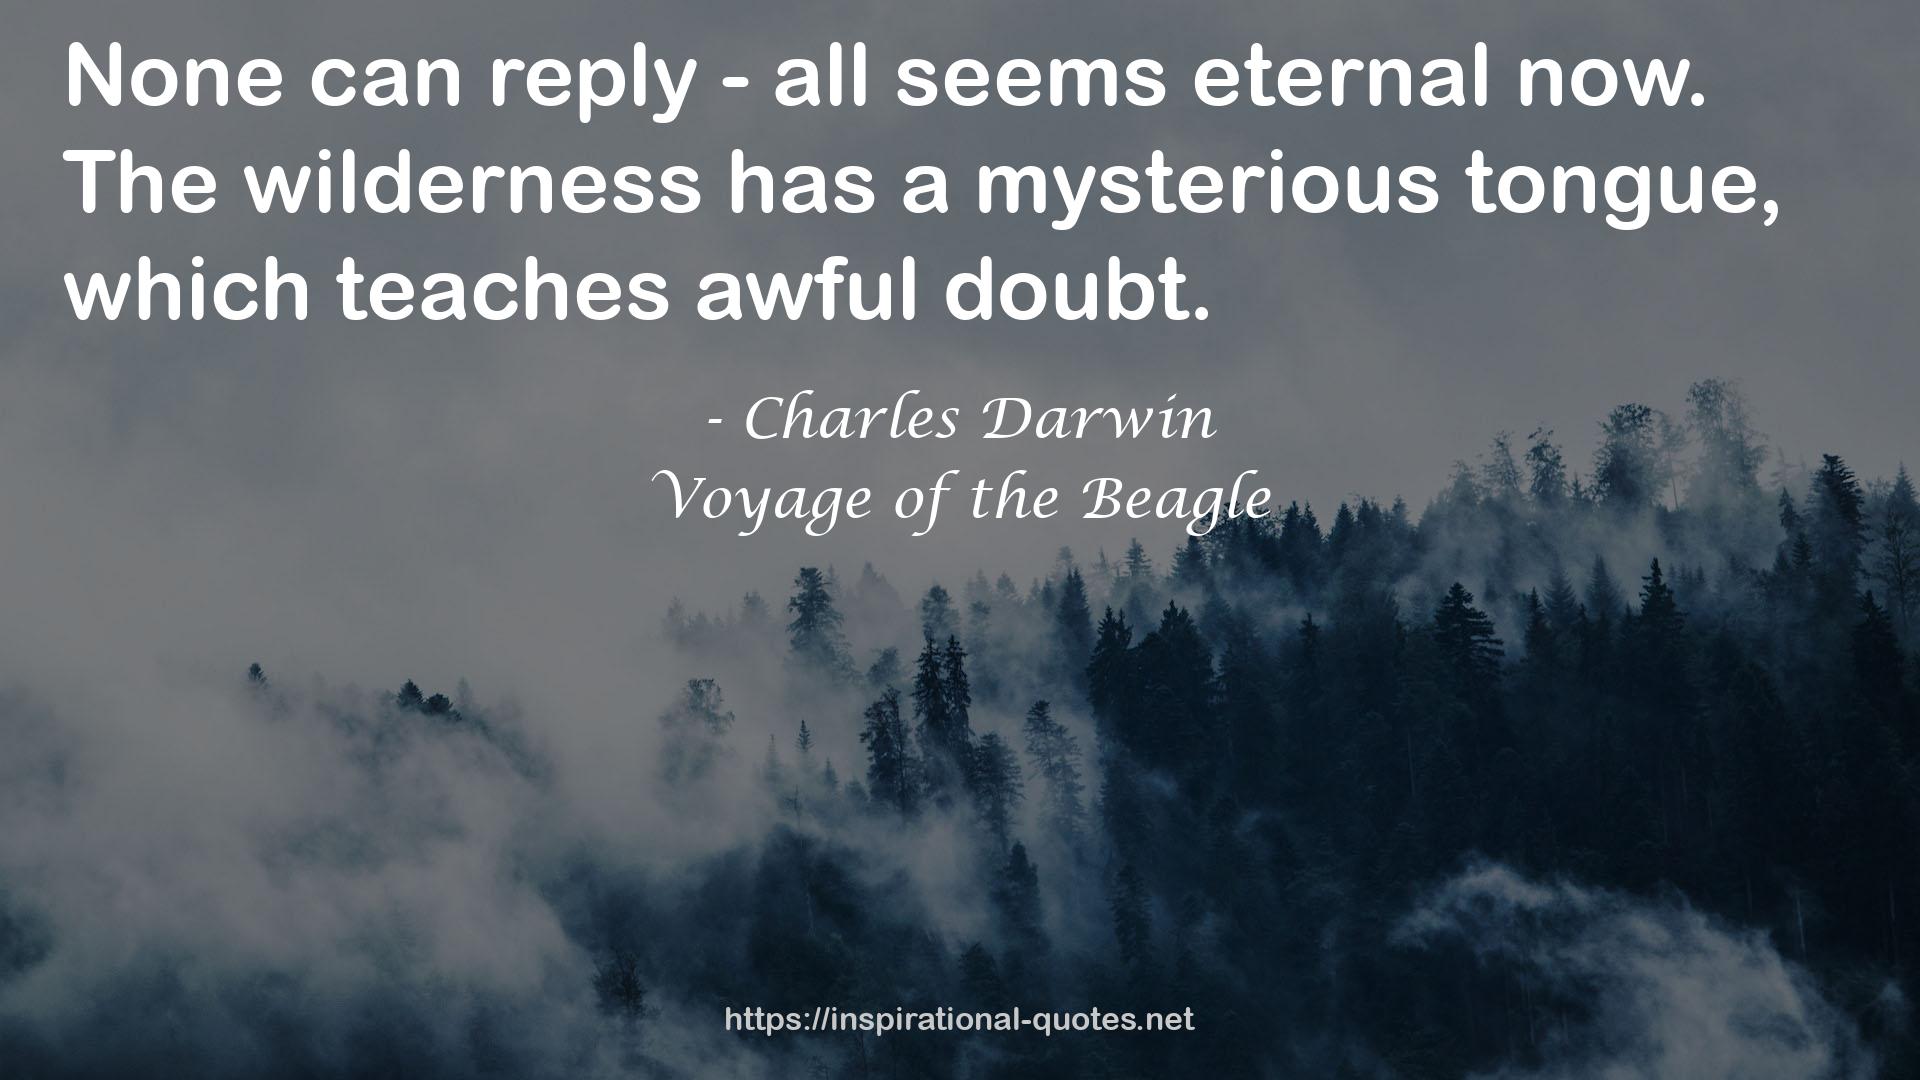 Voyage of the Beagle QUOTES